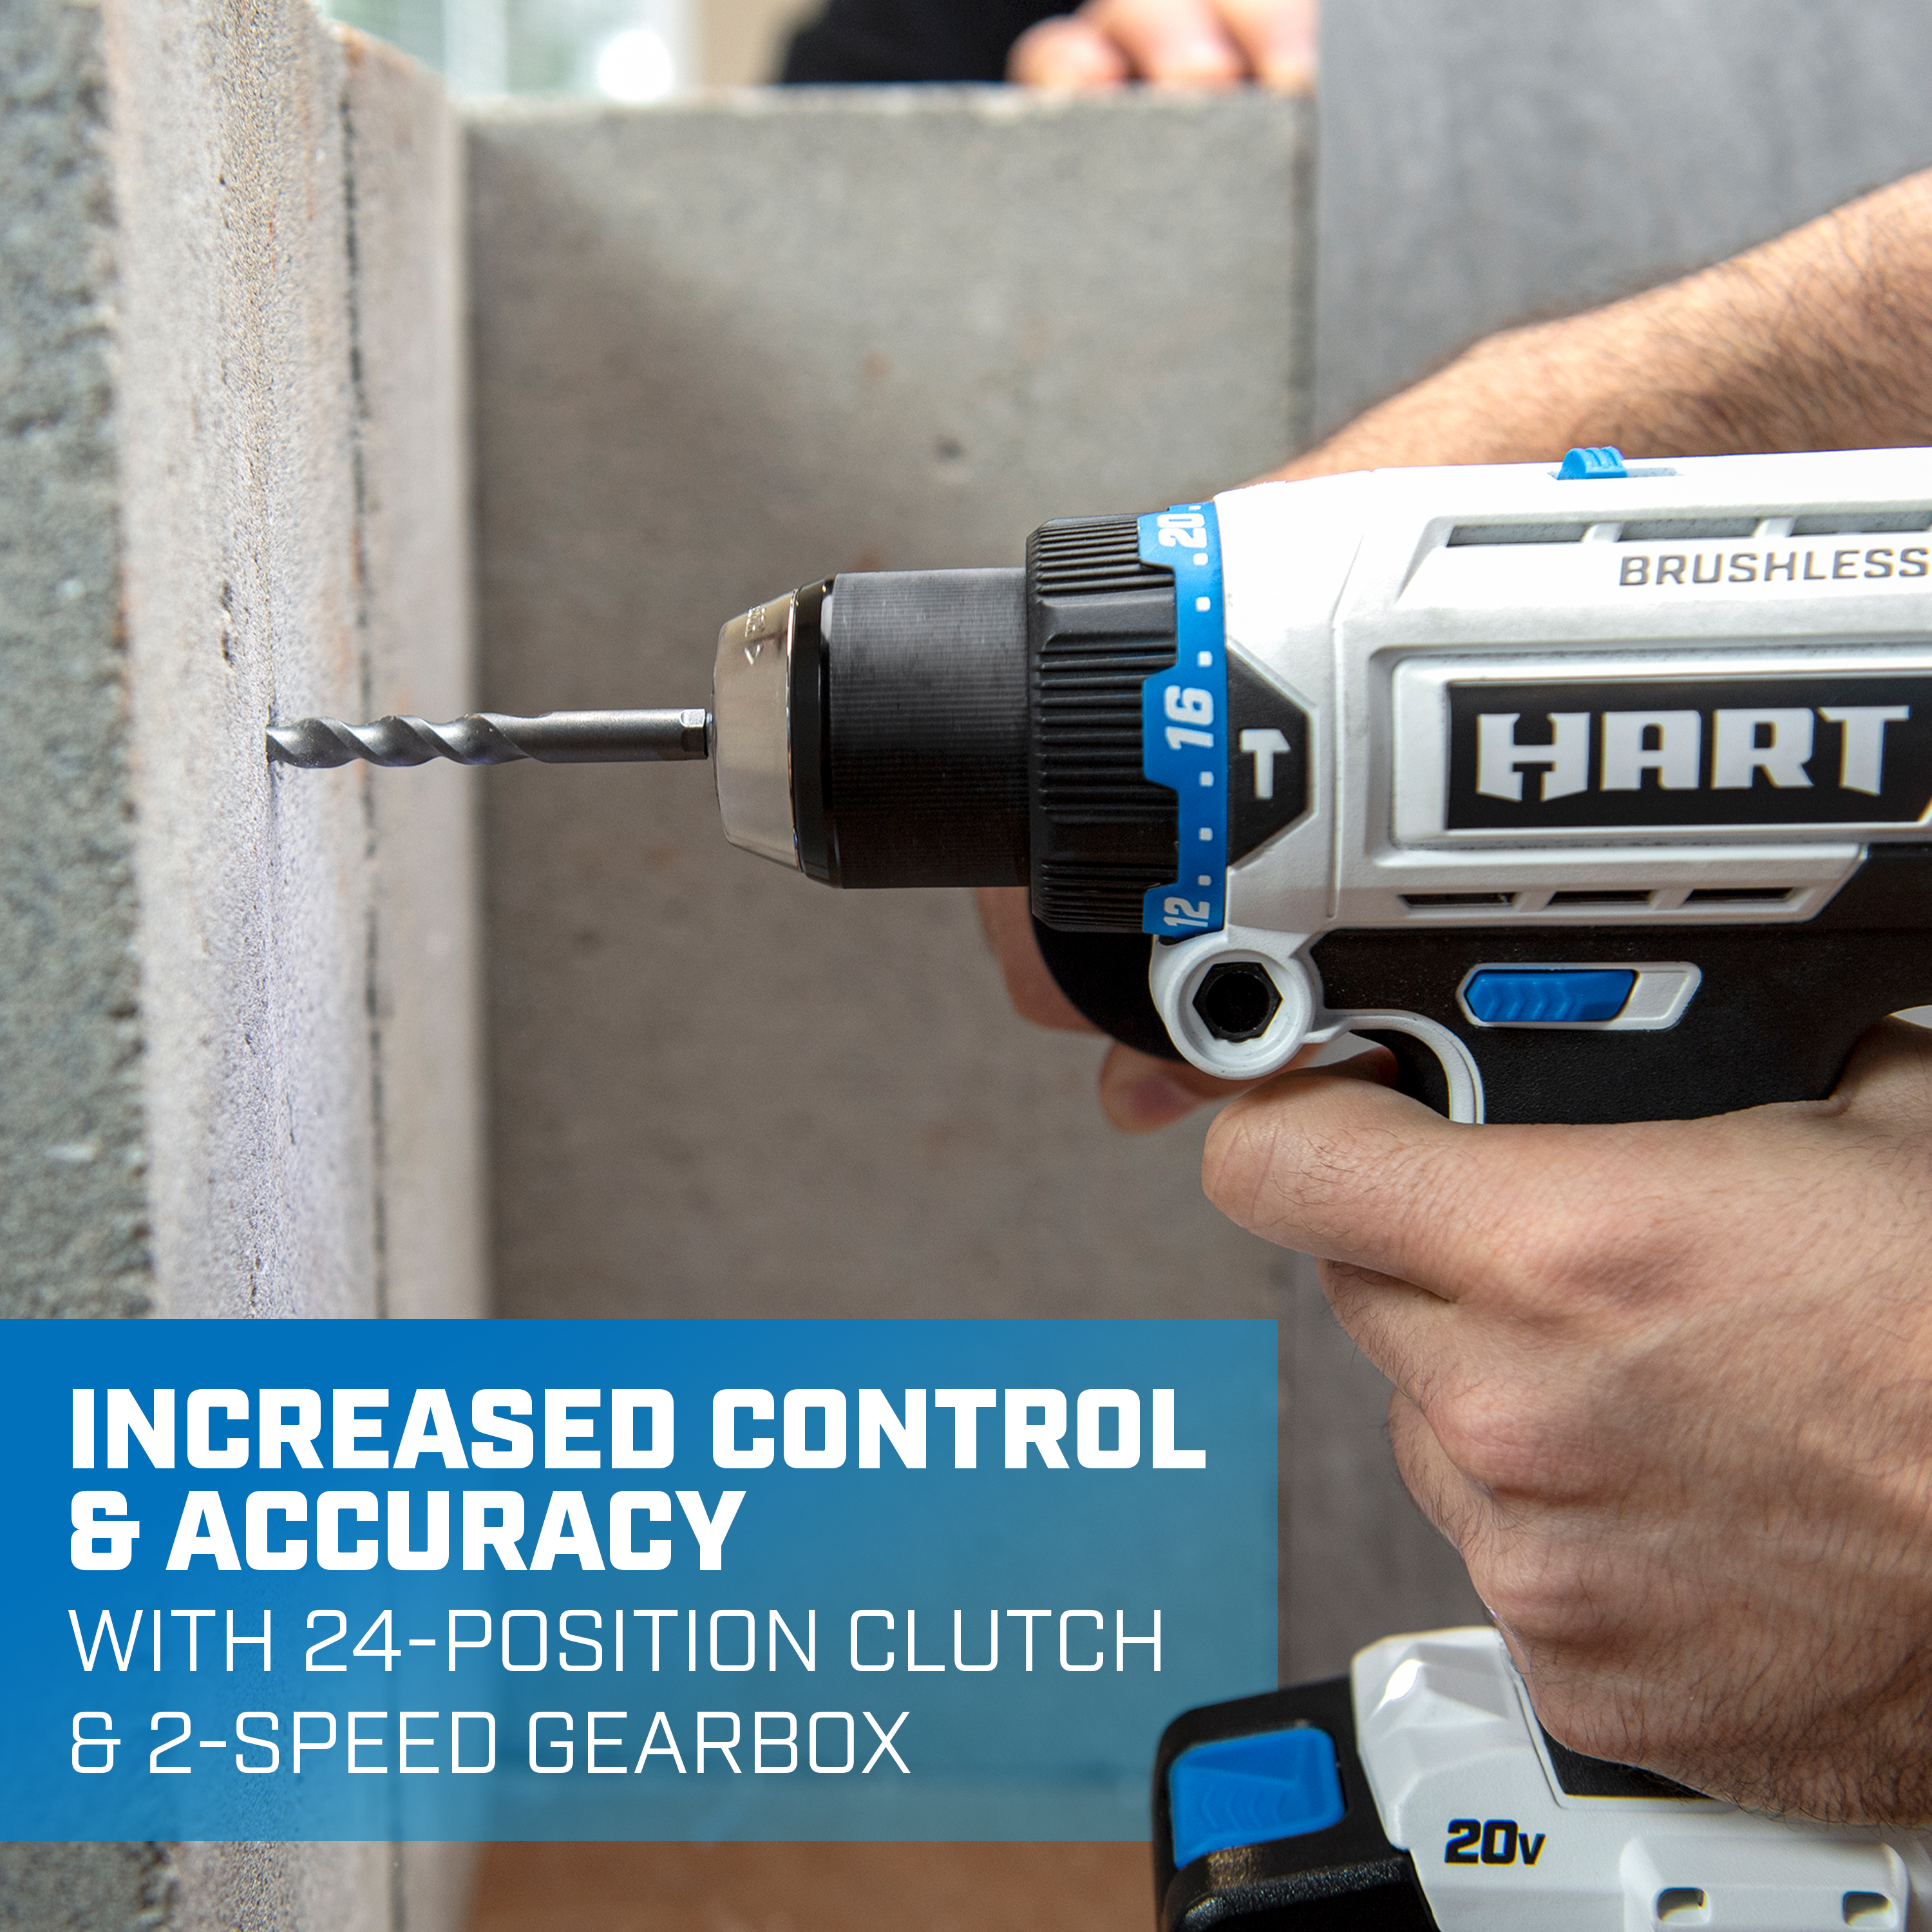 Increased Control & Accuracy with 24-Position clutch & 2-Speed Gearbox